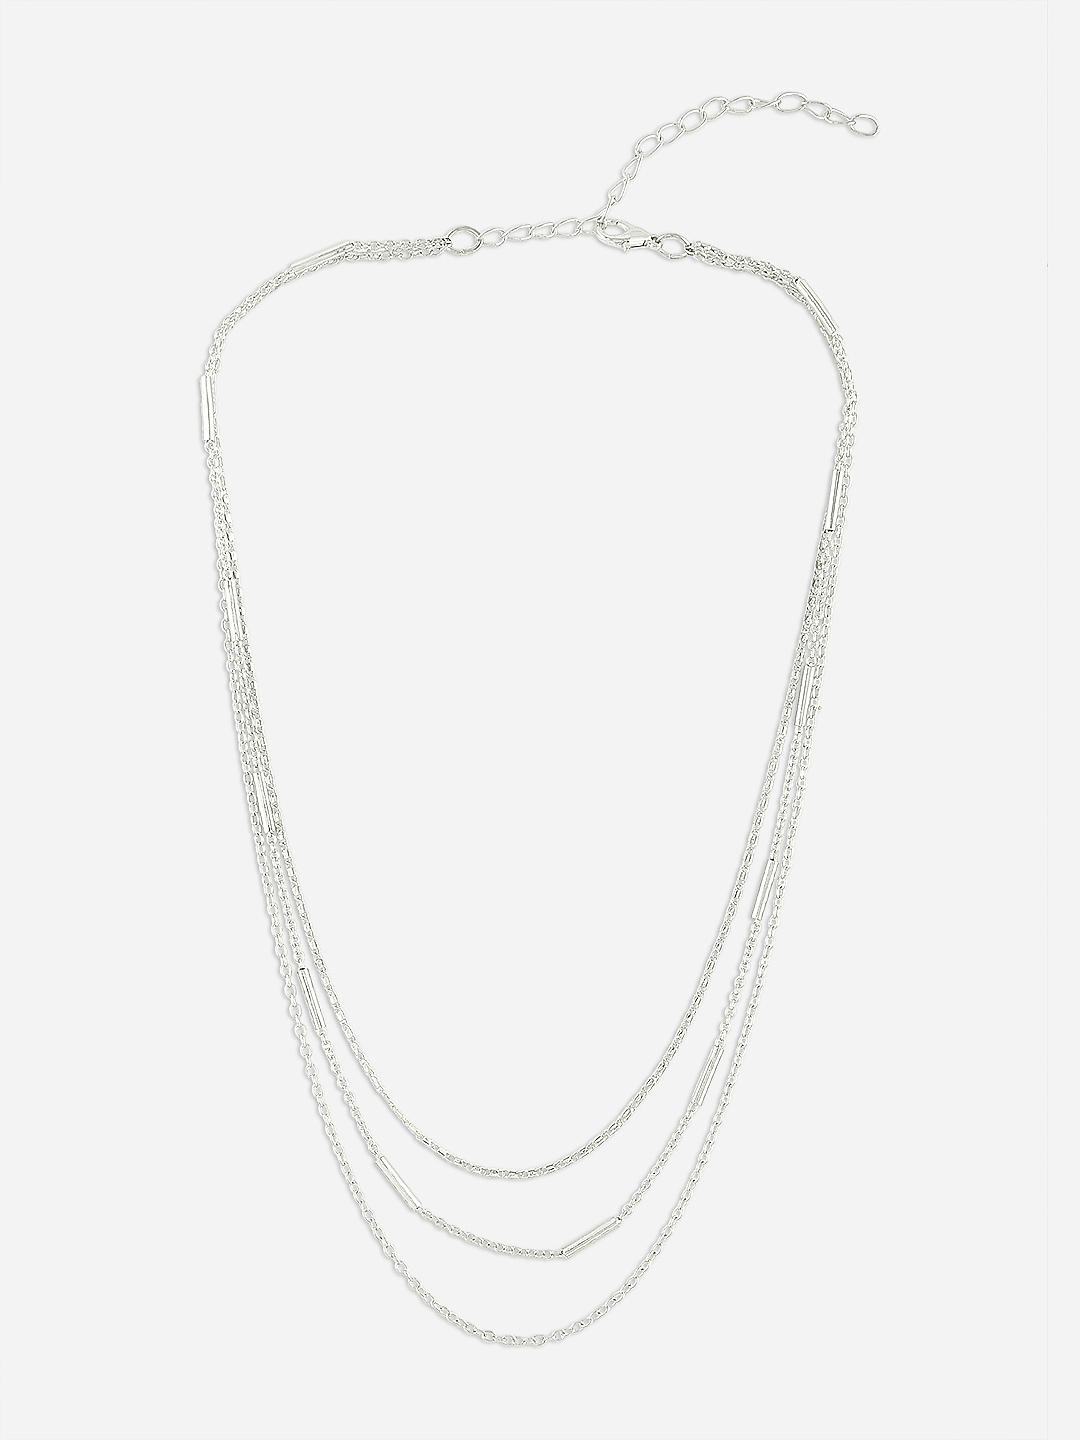 Triple Layer Necklace 1 ct tw Diamonds Sterling Silver 18.3